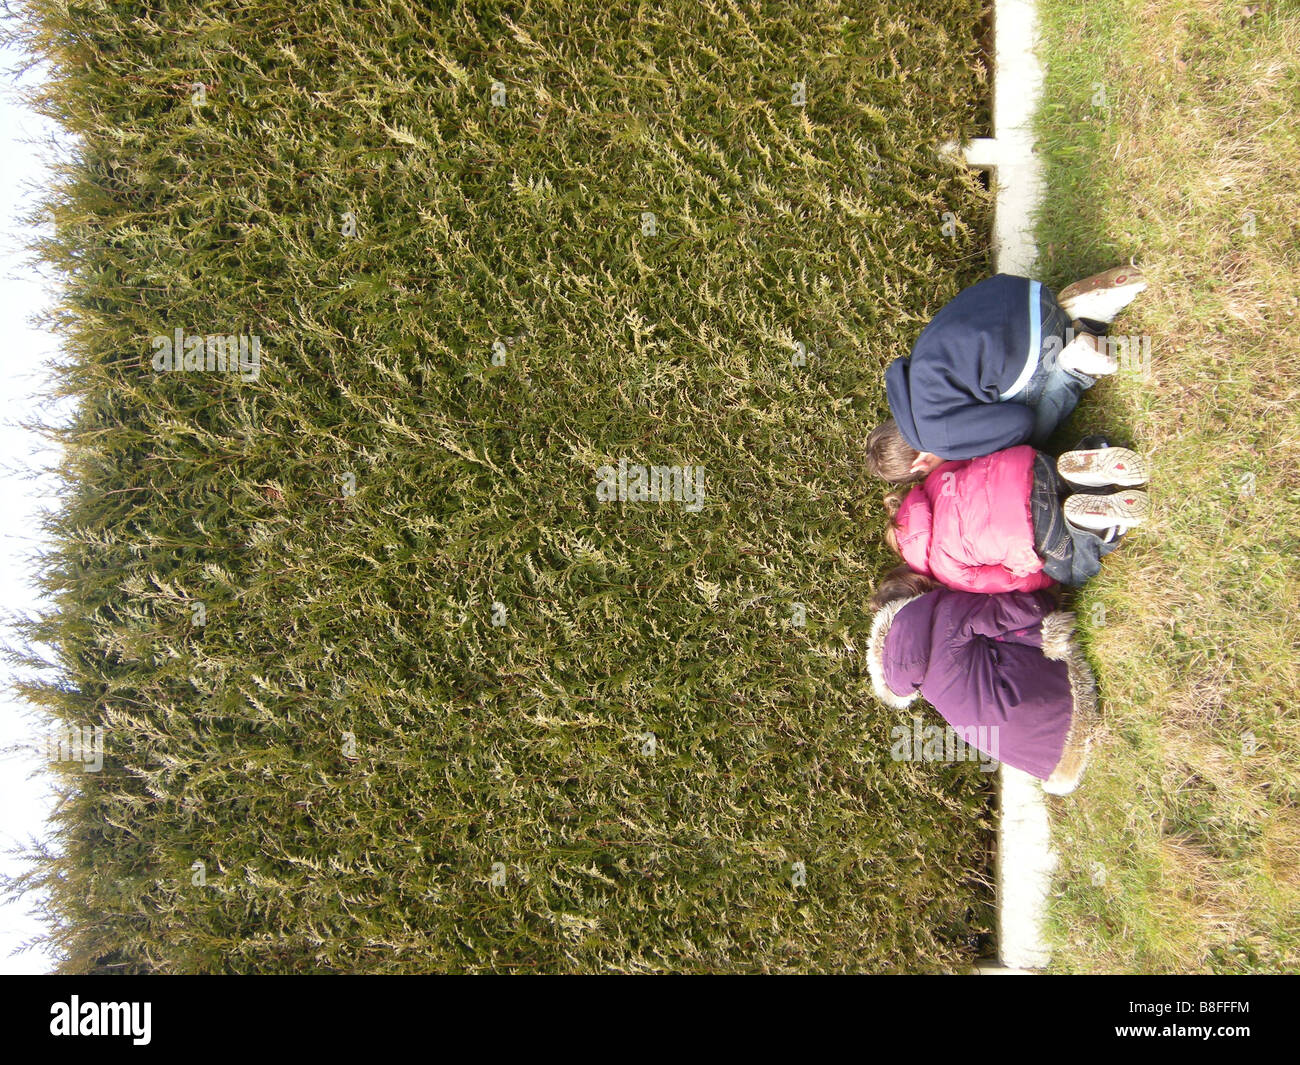 Children looking through a Large hedge. Stock Photo